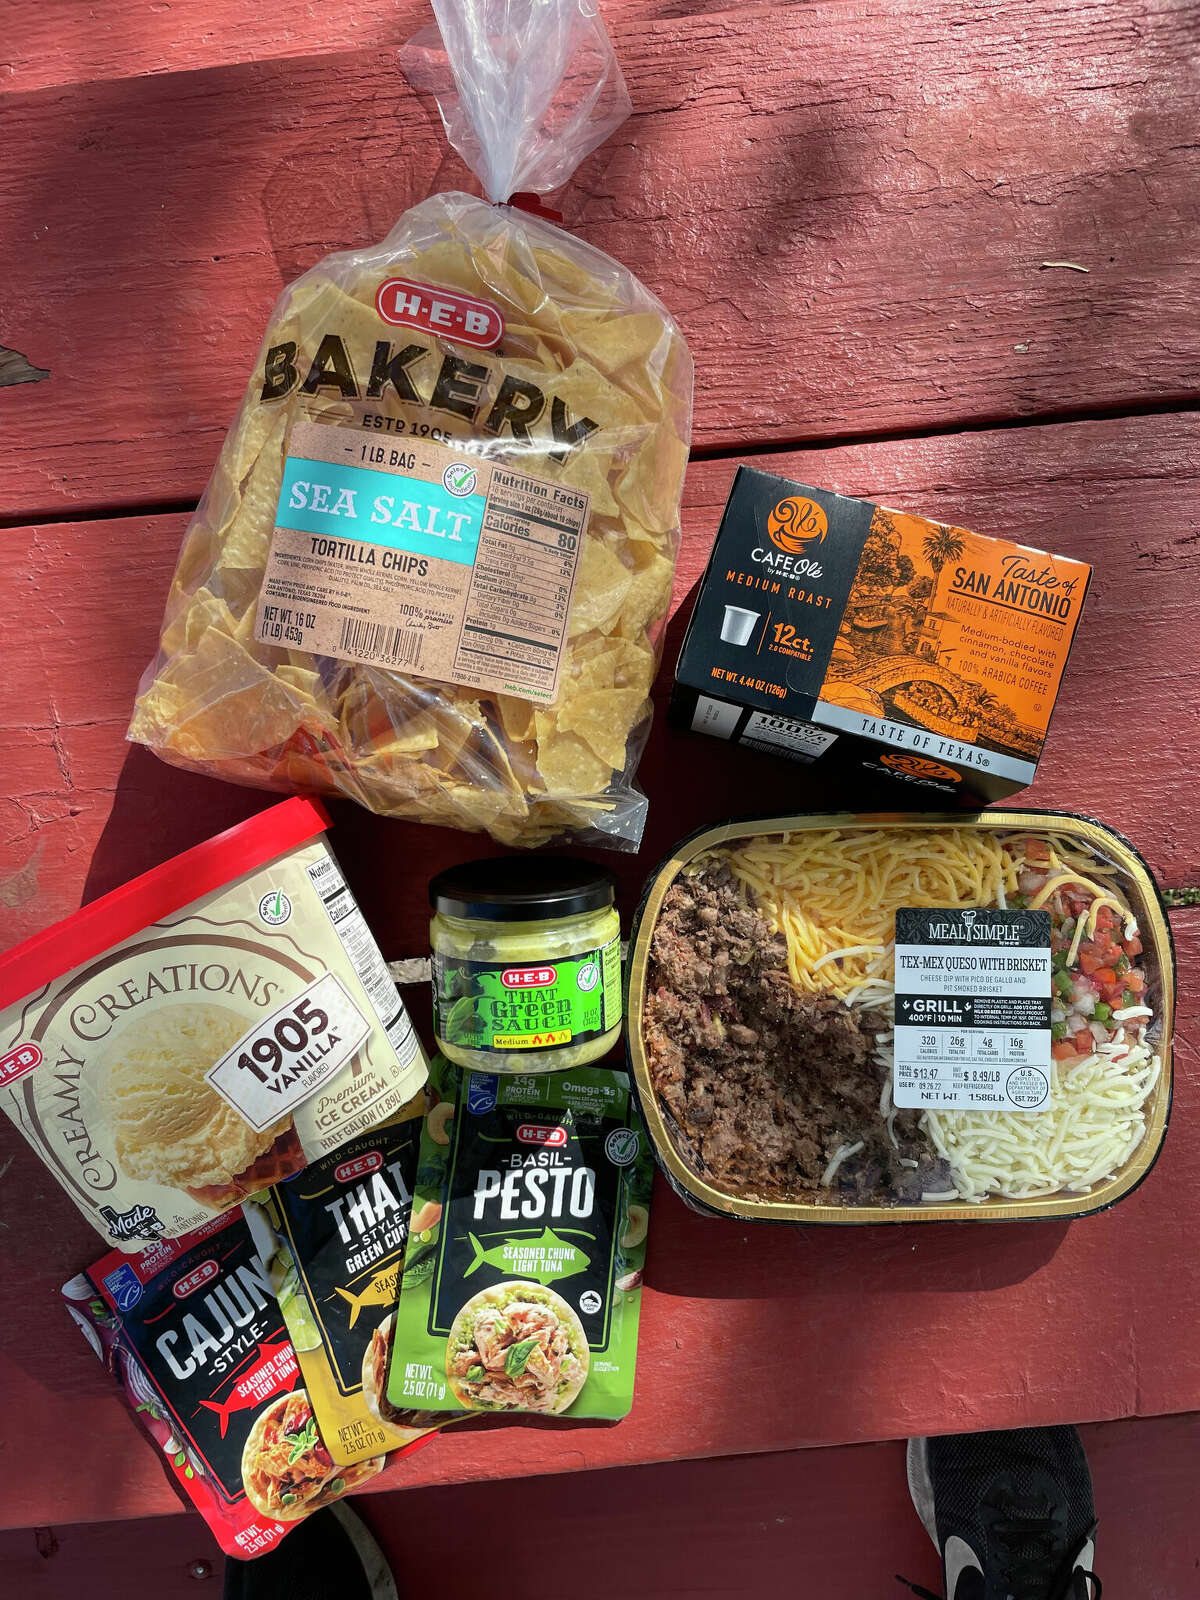 H-E-B has a huge line of products and some of the best include (clockwise from left): Creamy Creations 1905 Vanilla ice cream, sea salt tortilla chips, Taste of San Antonio blend coffee, Tex-Mex queso, That Green Sauce and flavored tuna packets.